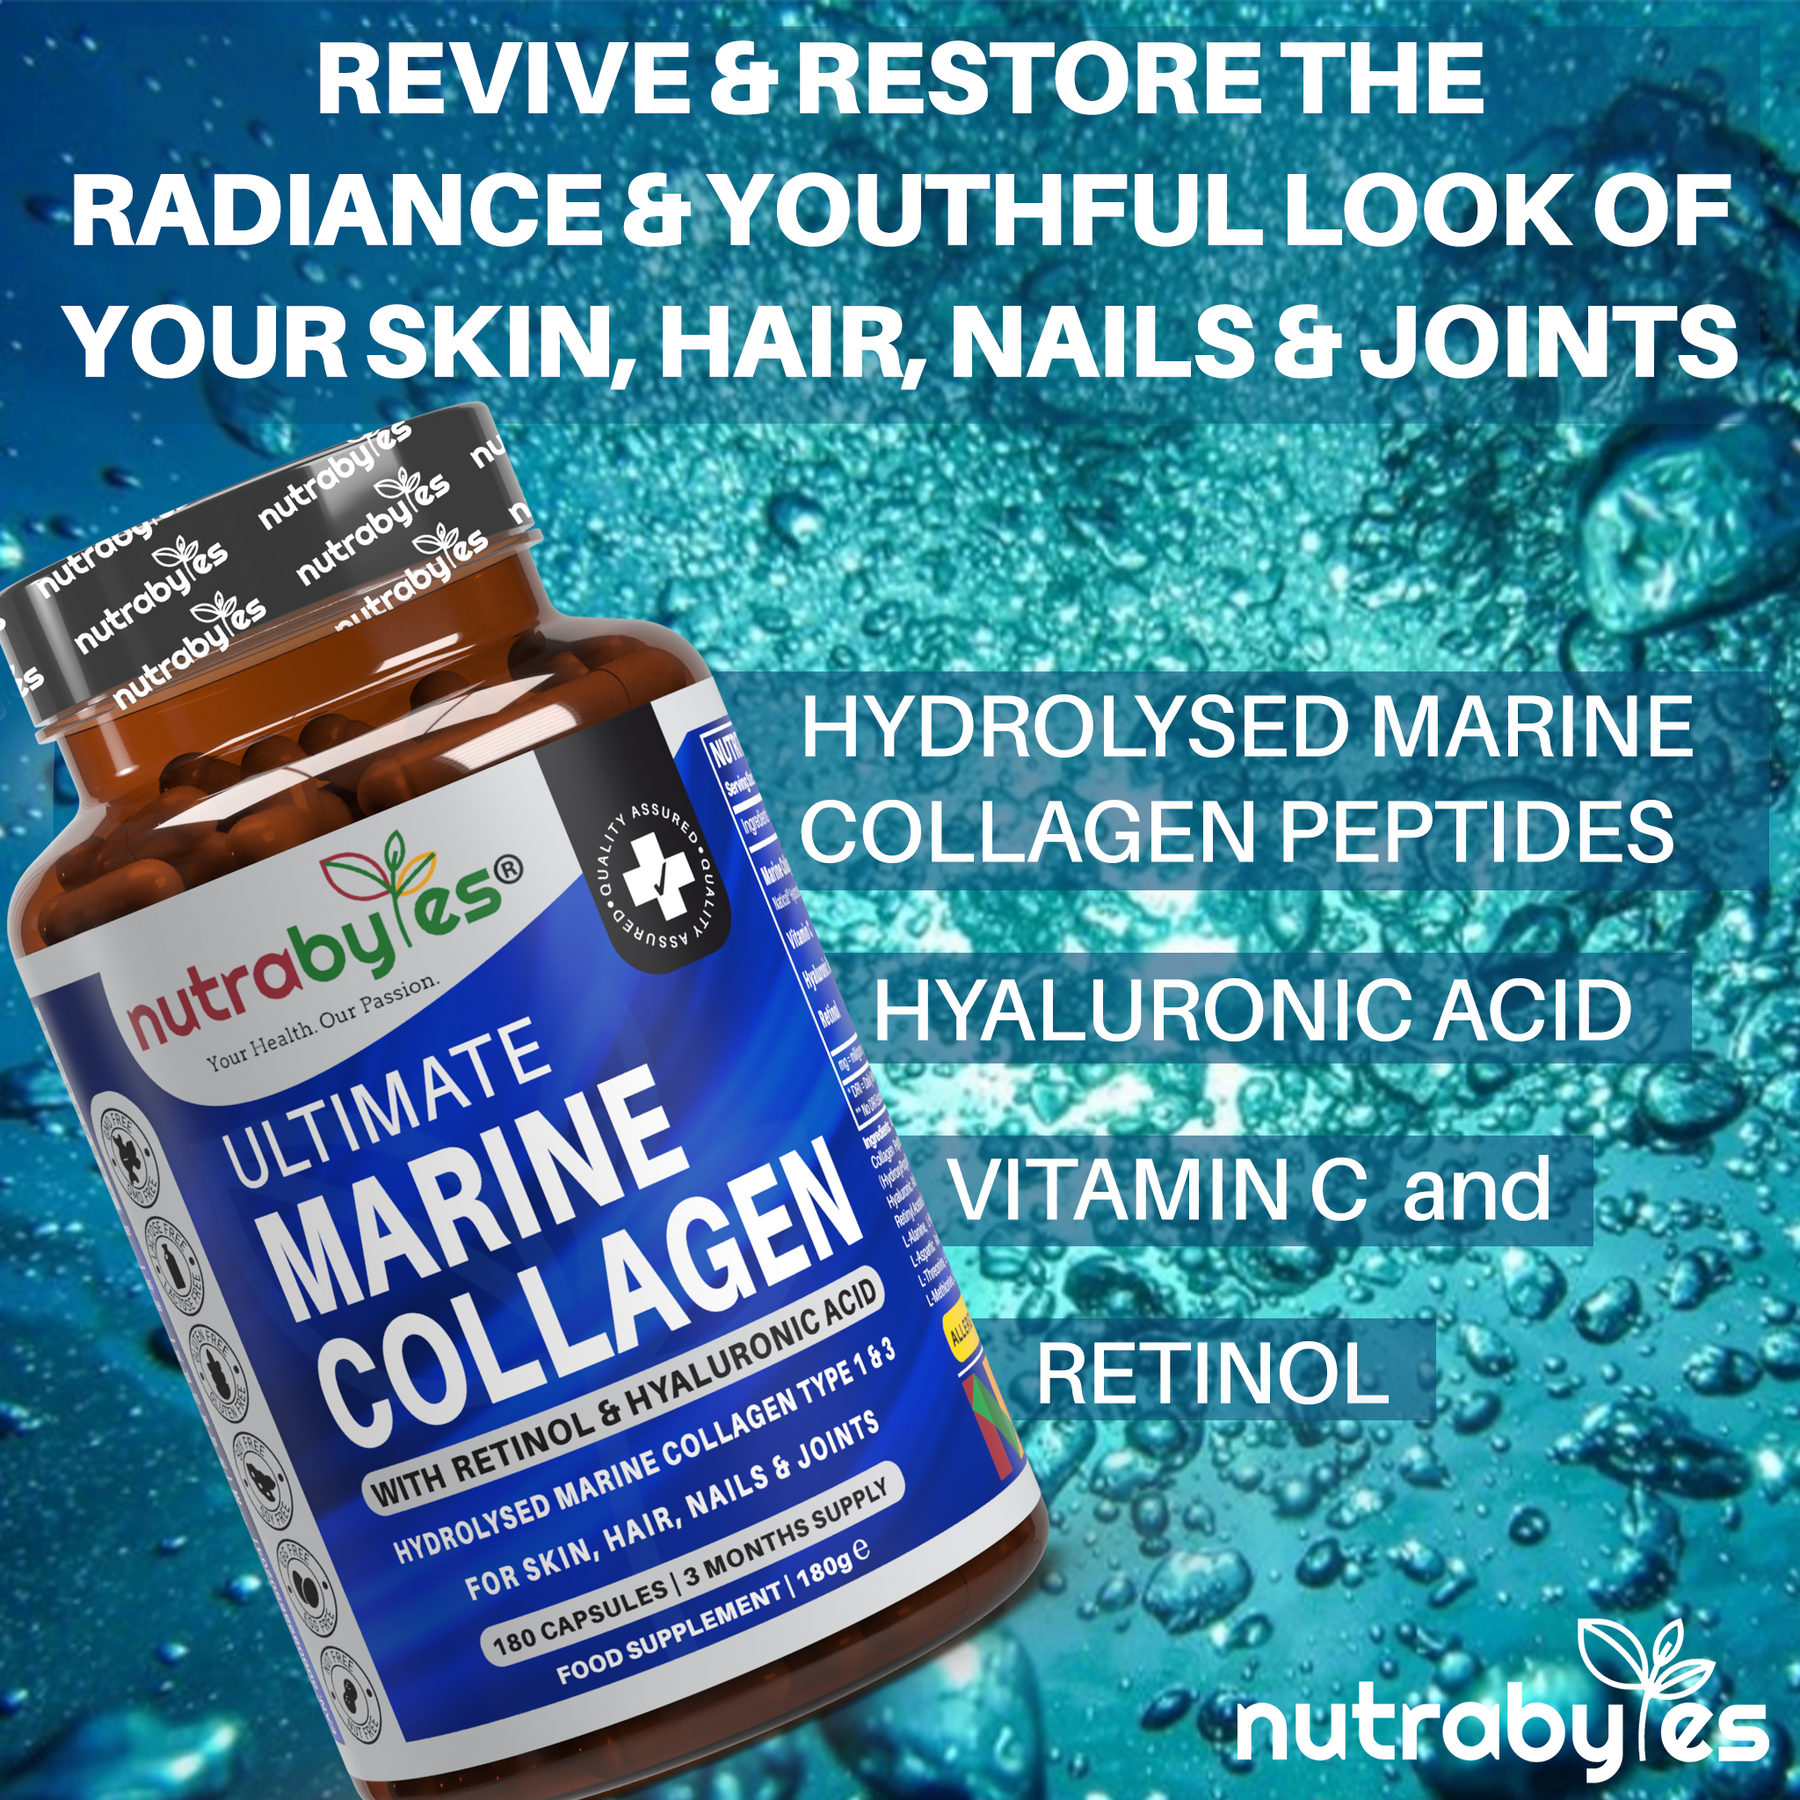 Ultimate Marine Collagen Supplement with Retinol, Hyaluronic Acid & Vitamin C | 180 Capsules - 3 Months Supply | Collagen Type 1 & 3 | Made in UK